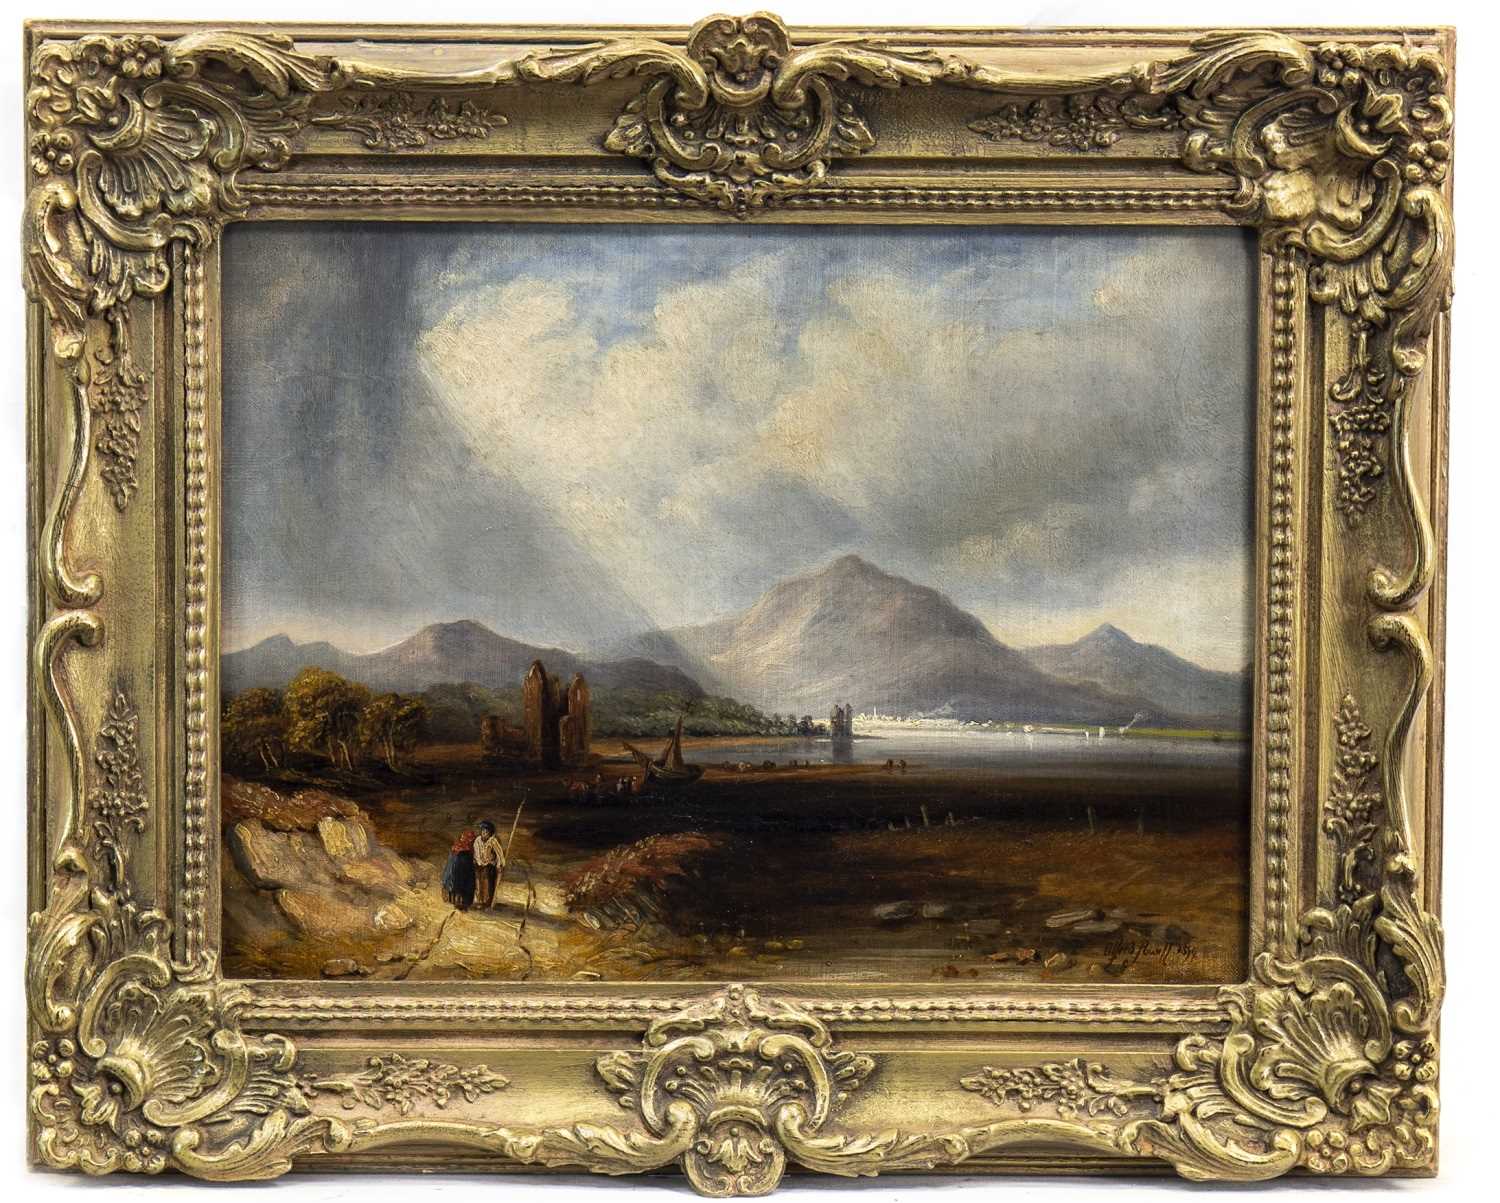 Lot 433 - SCOTTISH LANDSCAPE WITH FIGURE, AN OIL BY ALFRED POWELL